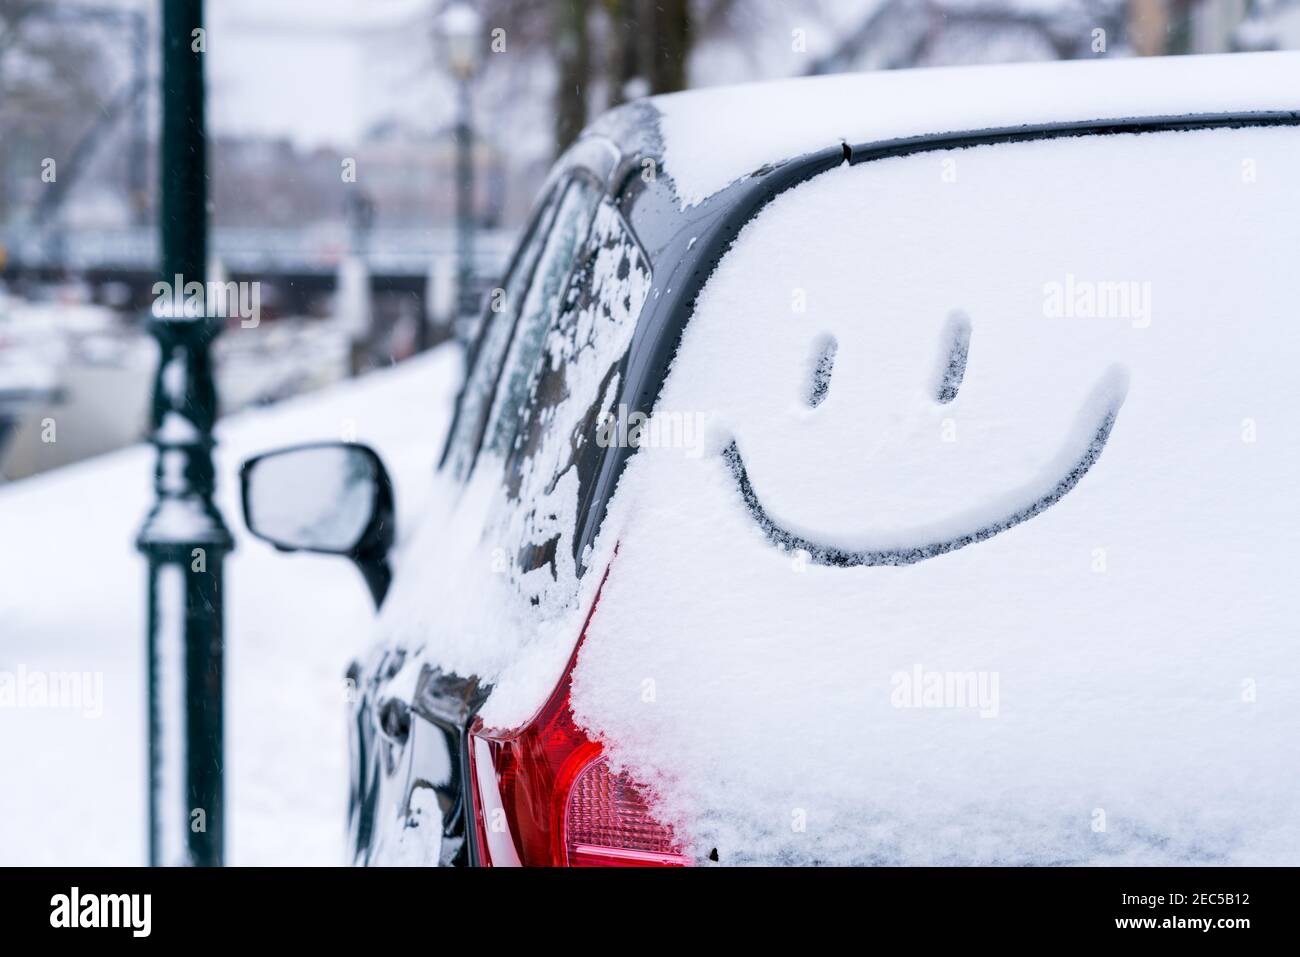 Parked car covered in snow at wintertime with a smiley face emoji drawn on the rear window of the automobile on the street. Stock Photo